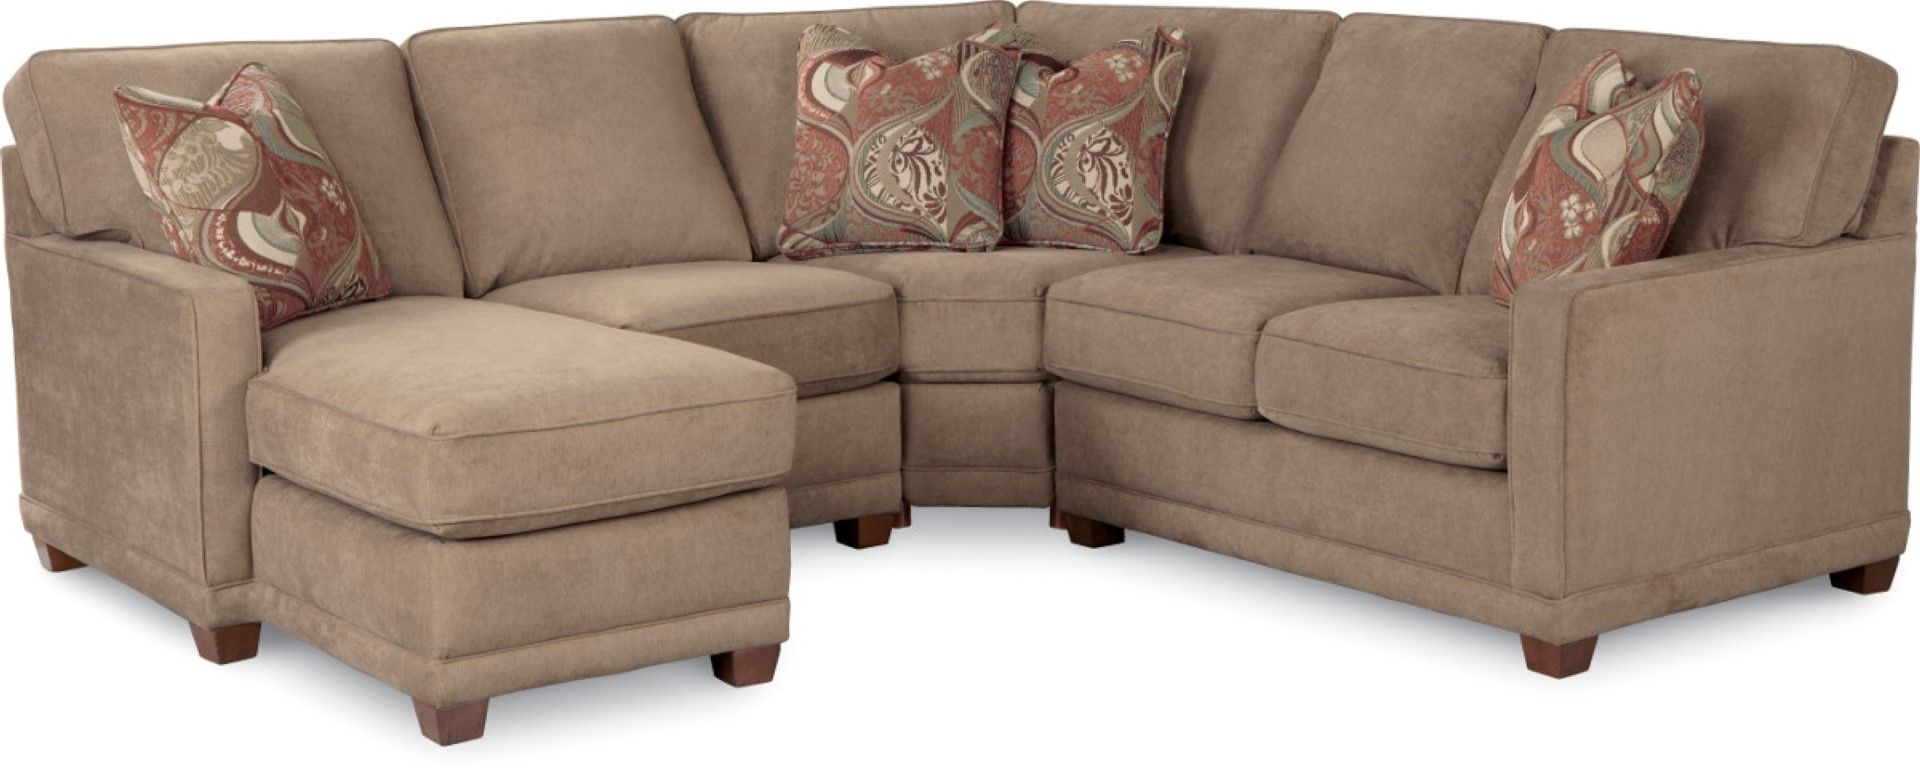 Featured Photo of 15 Inspirations Lazyboy Sectional Sofas